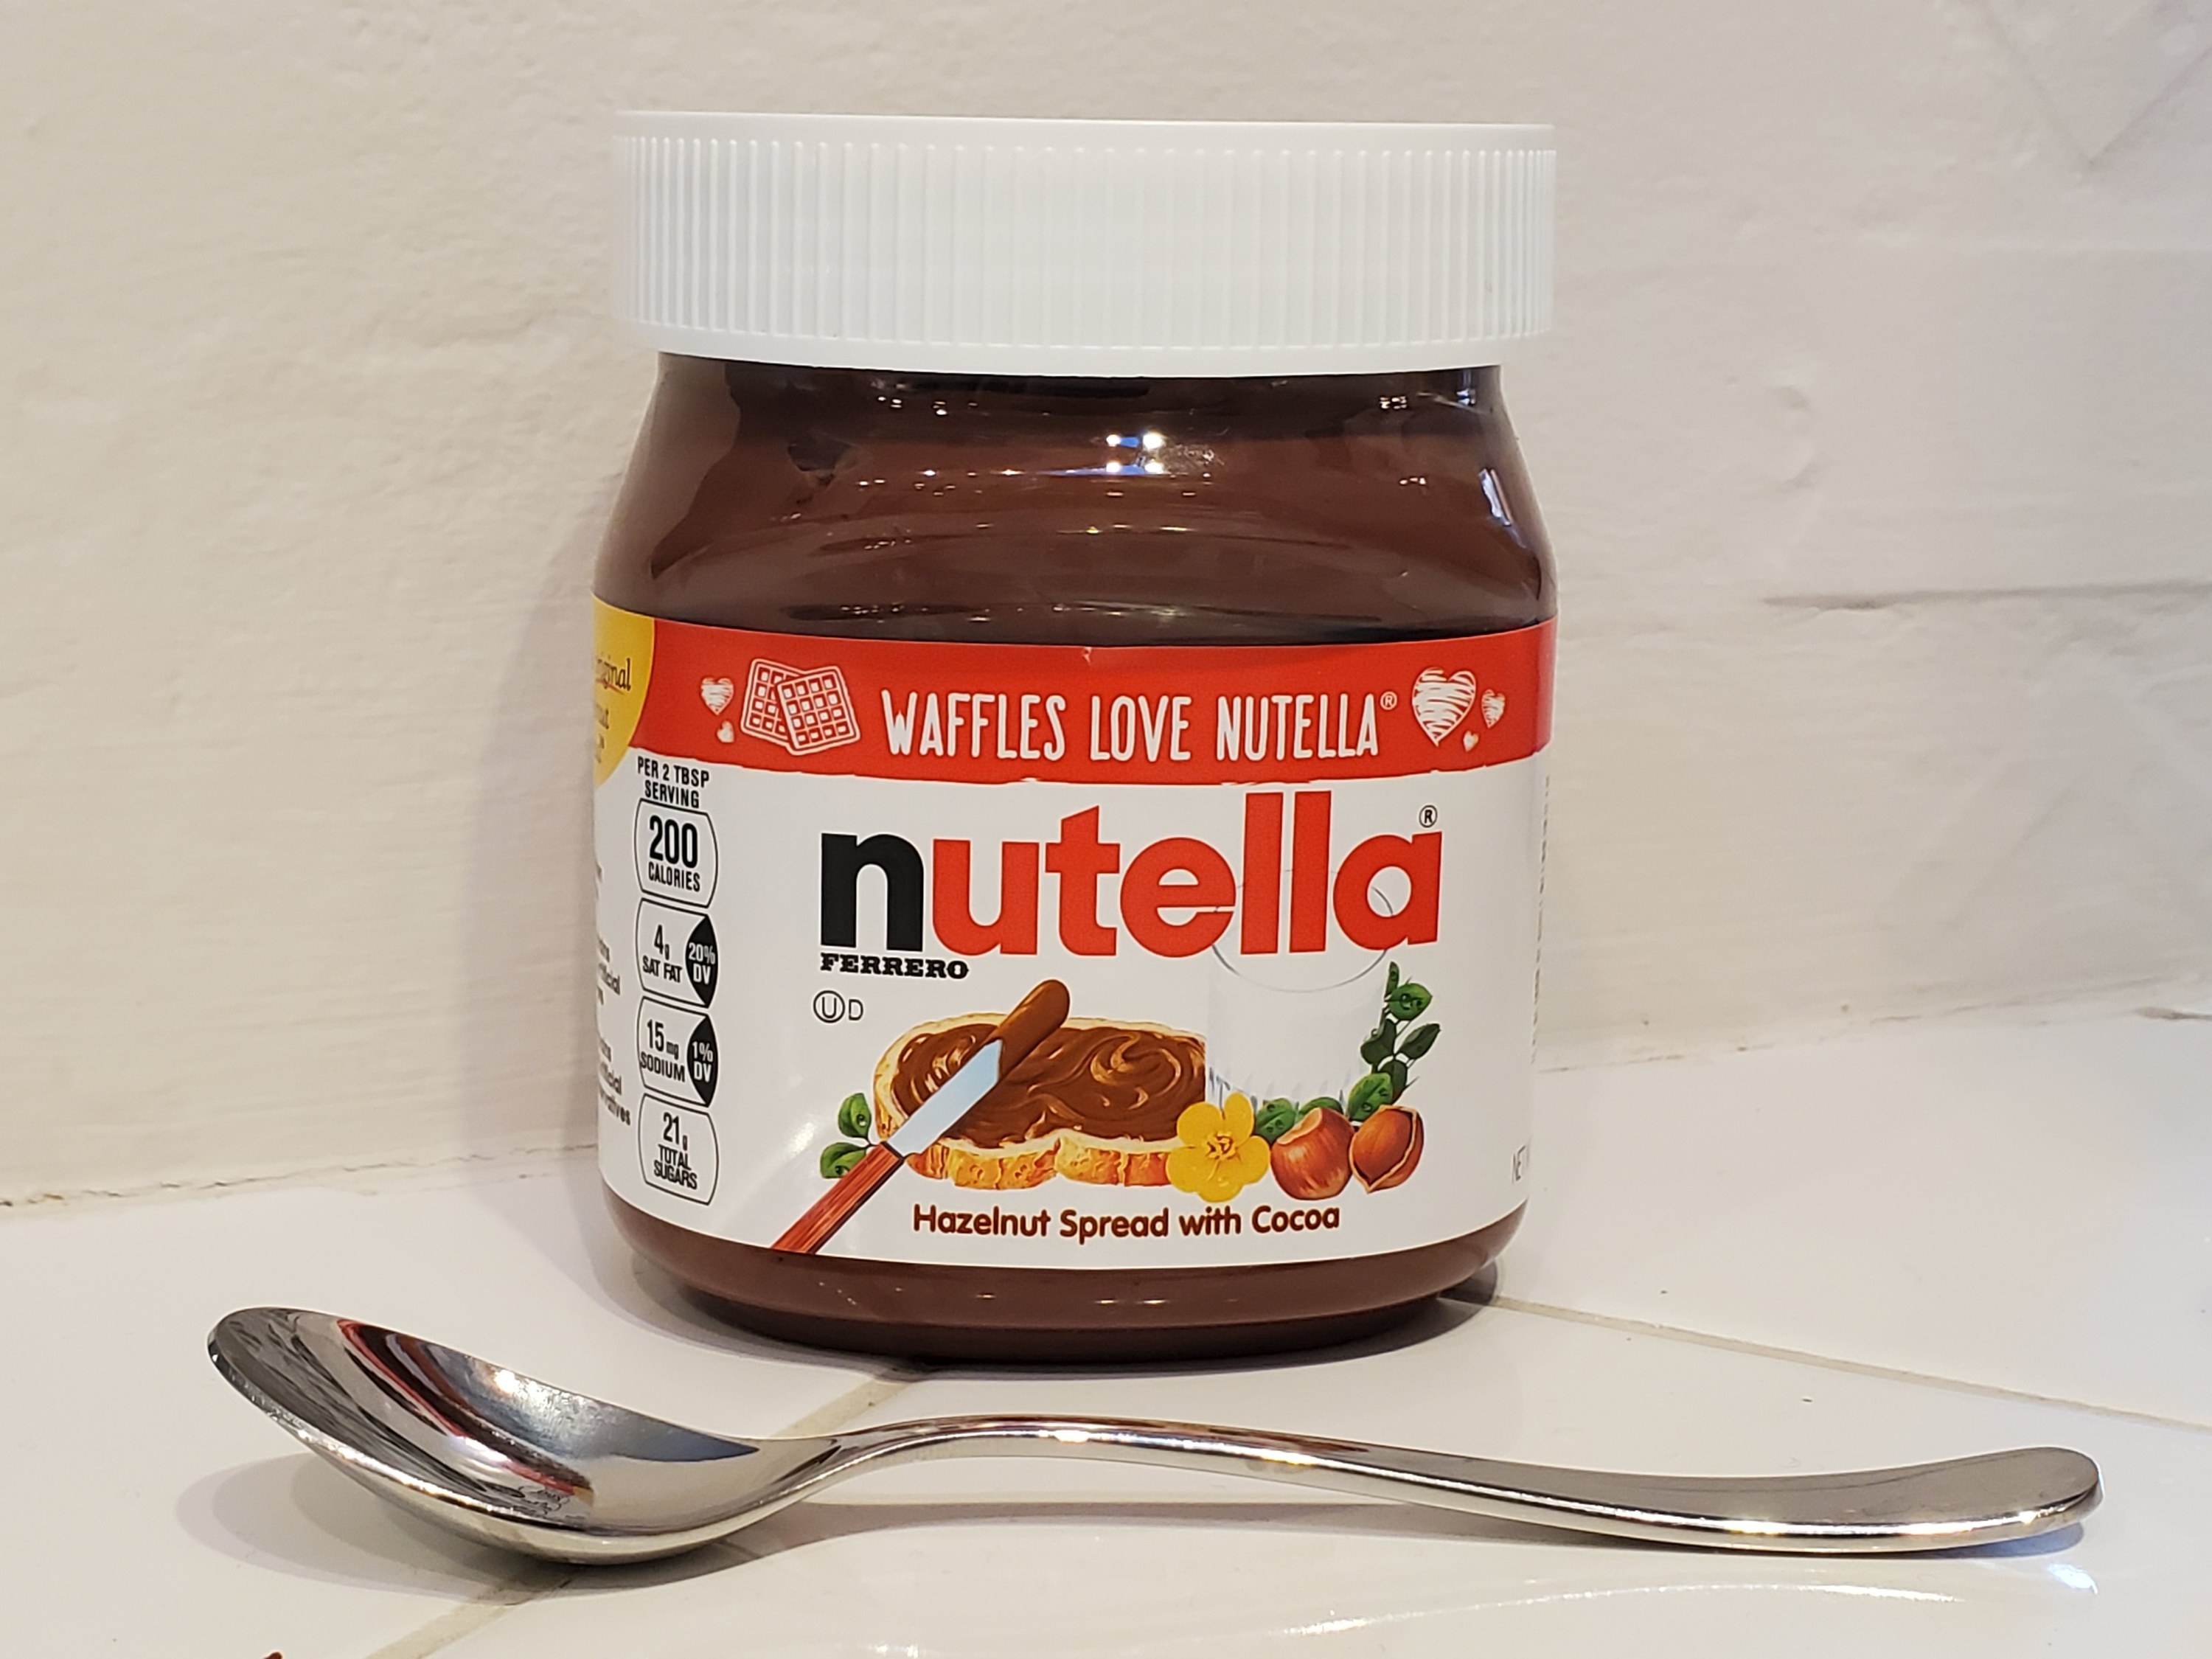 A jar of Nutella sitting on a countertop with a silver spoon next to it